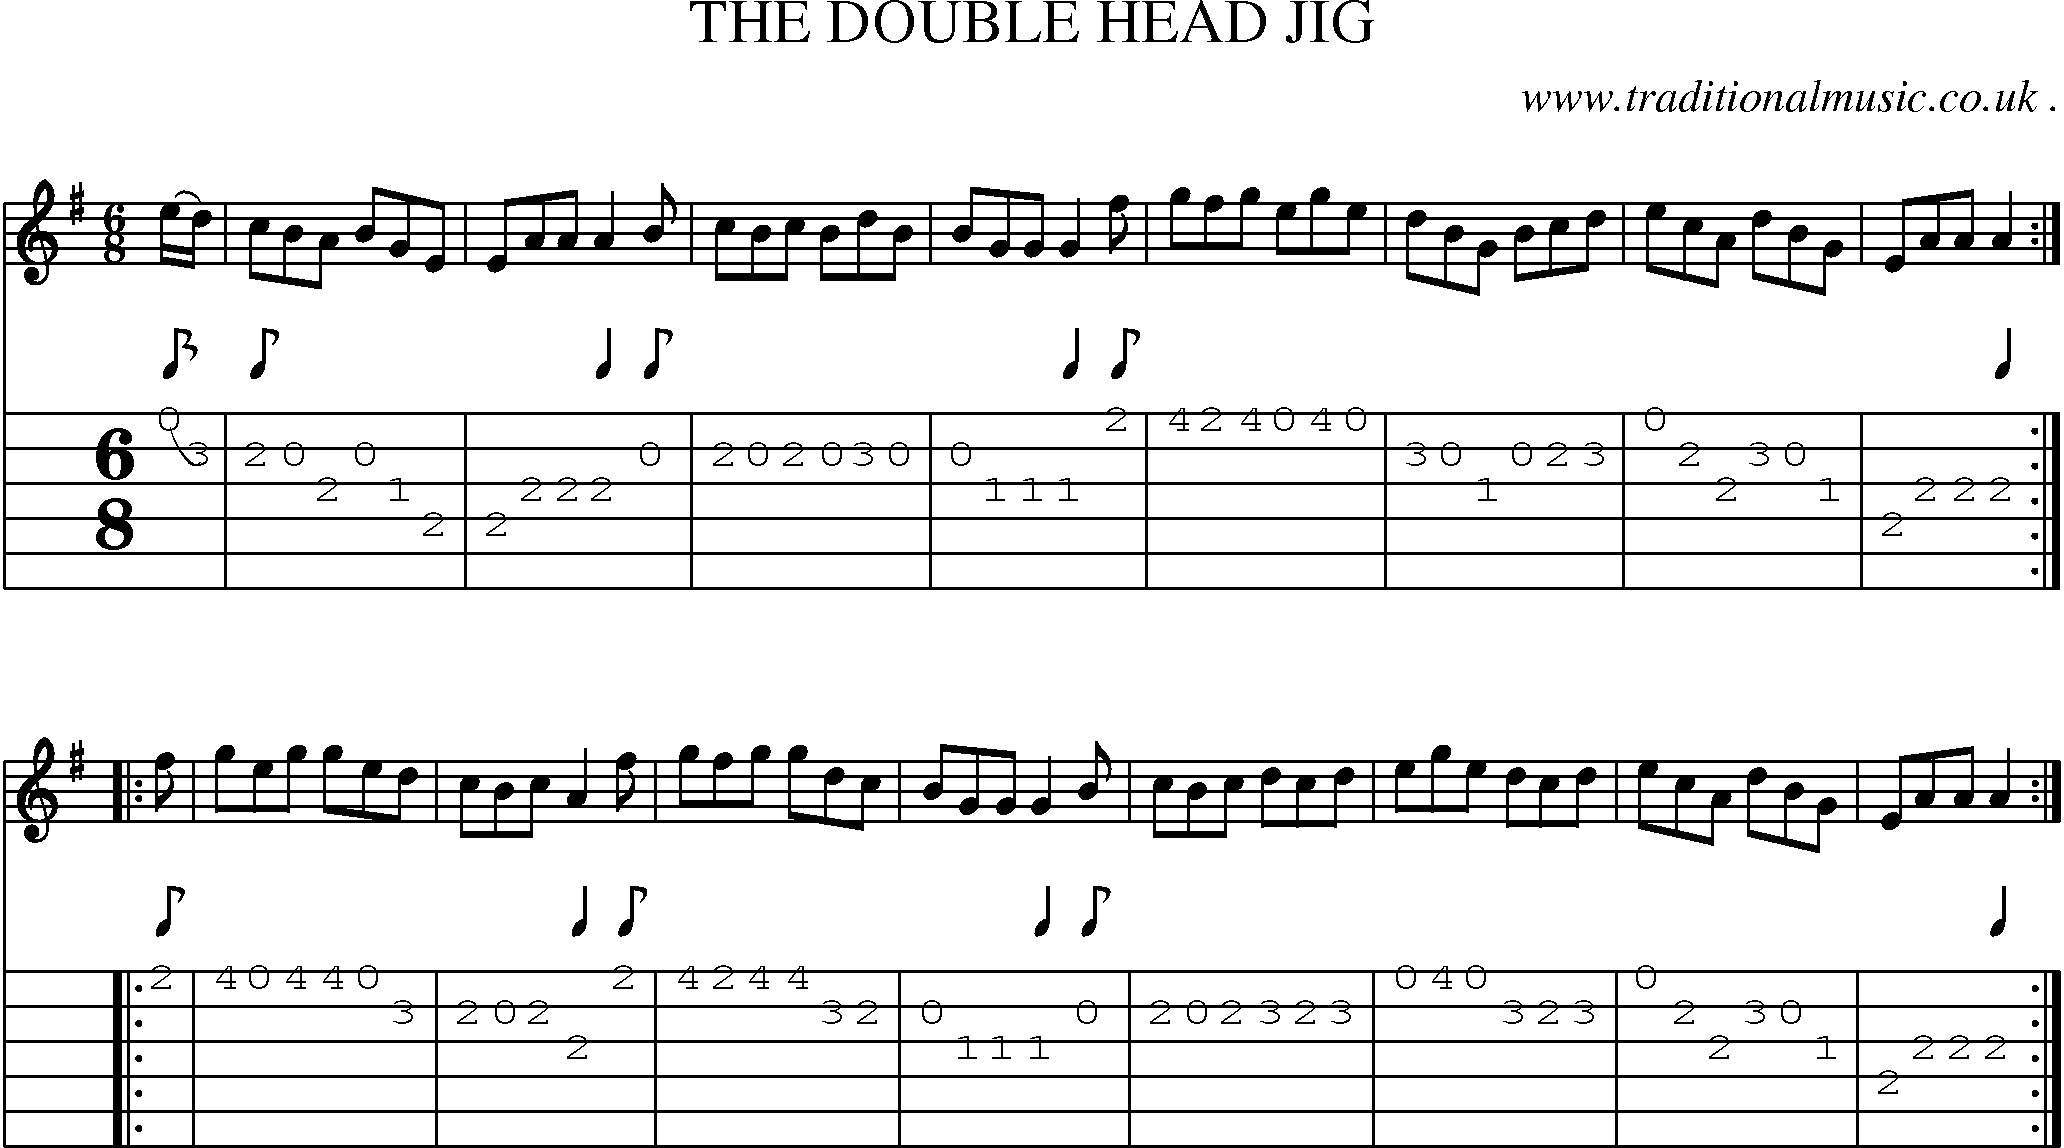 Sheet-Music and Guitar Tabs for The Double Head Jig